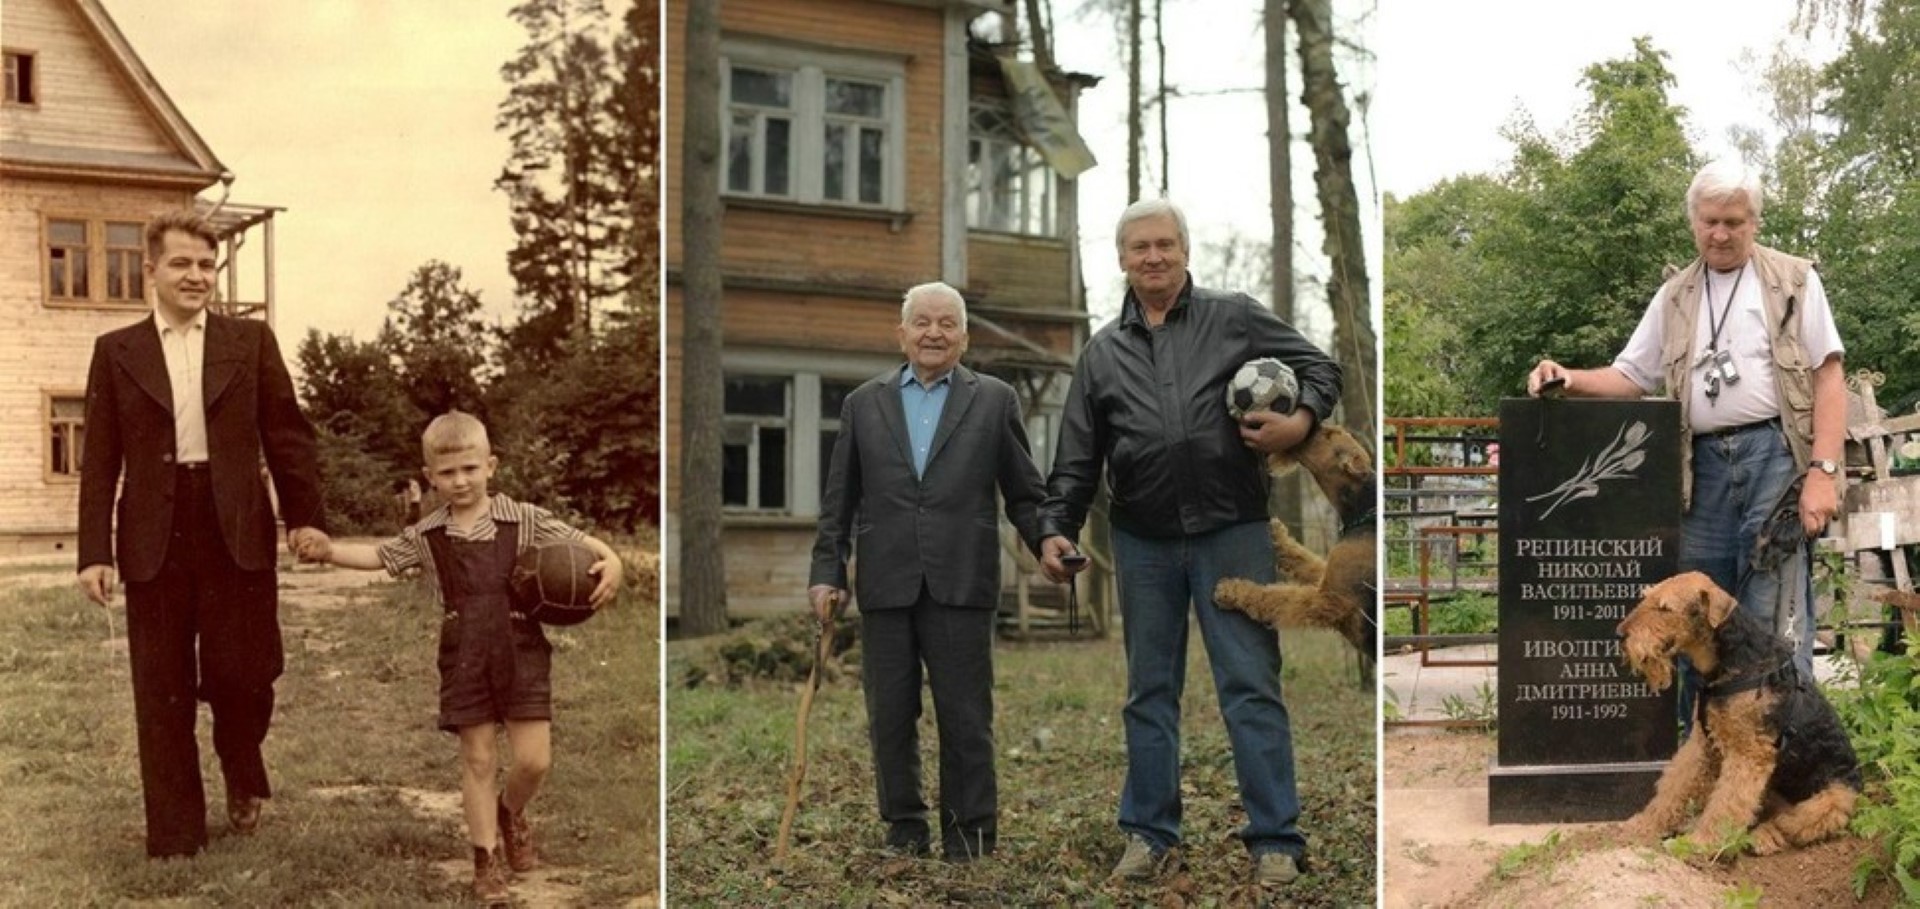 31 Photos Proving That Relationships Can Last A Lifetime